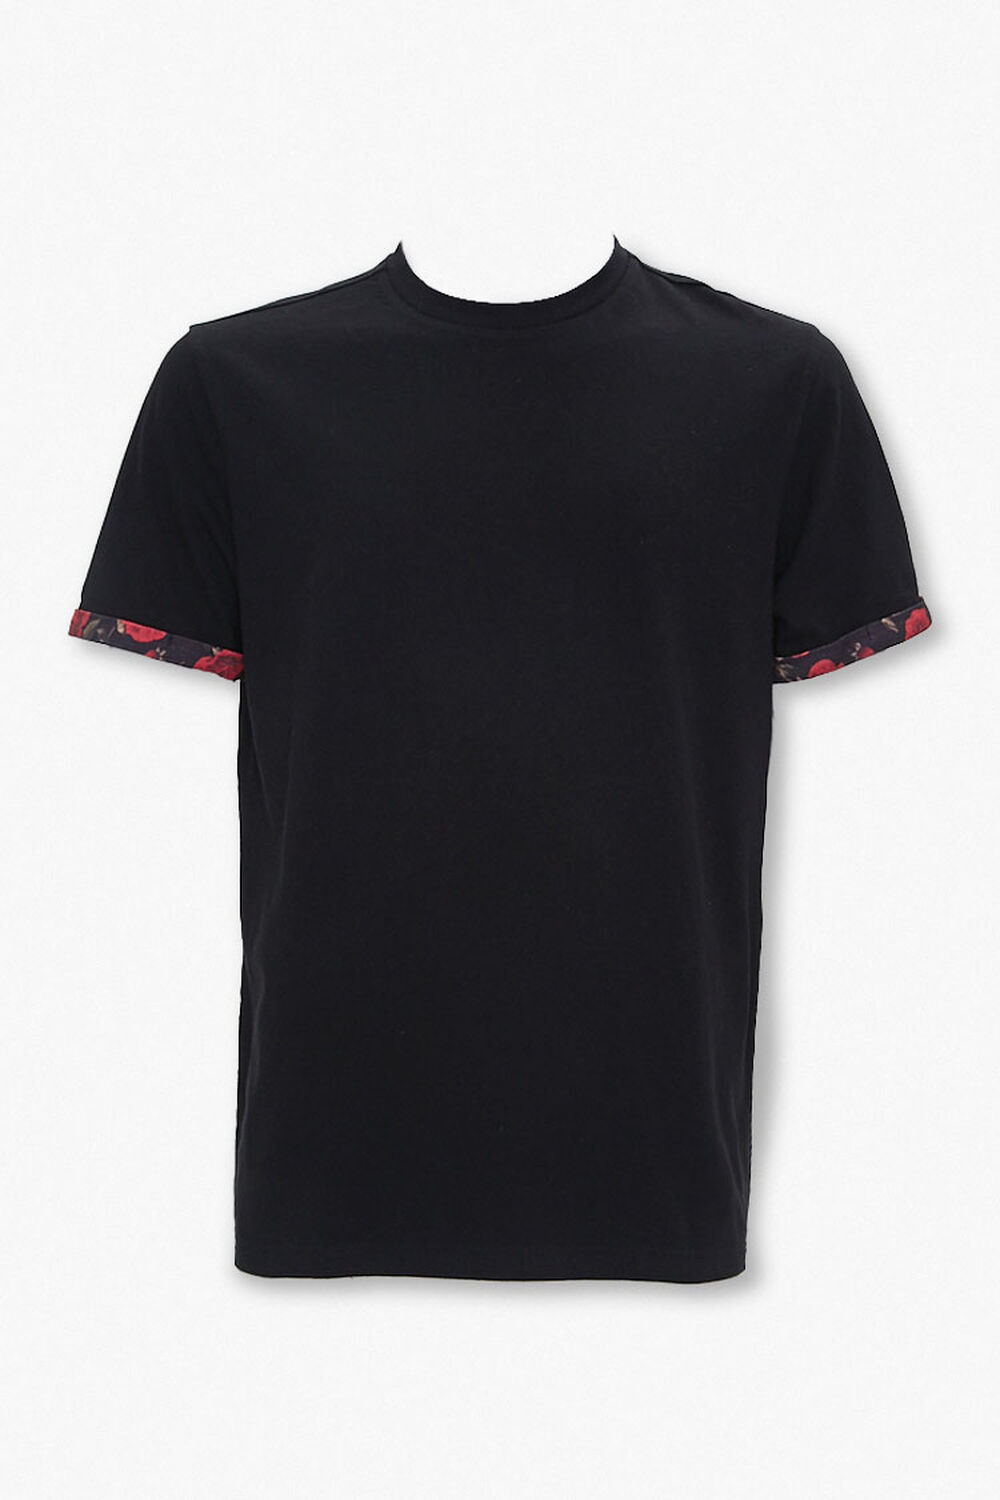 Floral-Cuff Cotton Tee, image 1